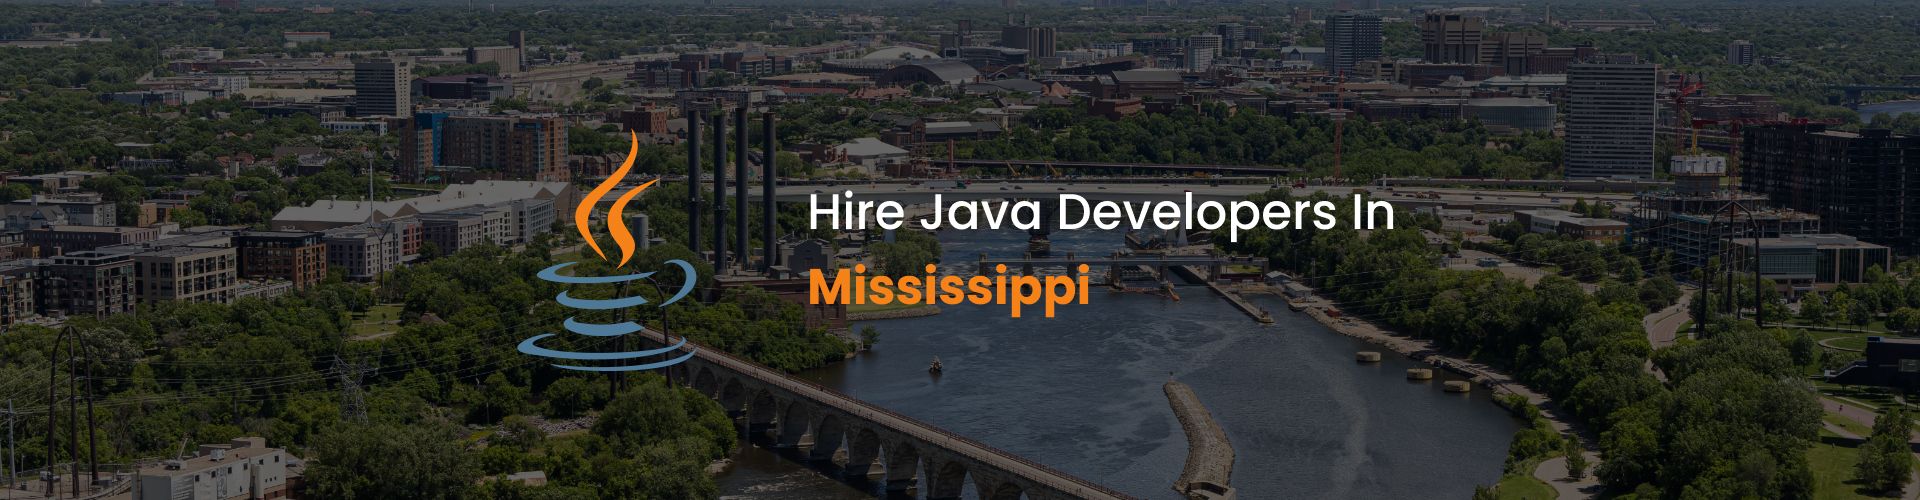 hire java developers in mississippi